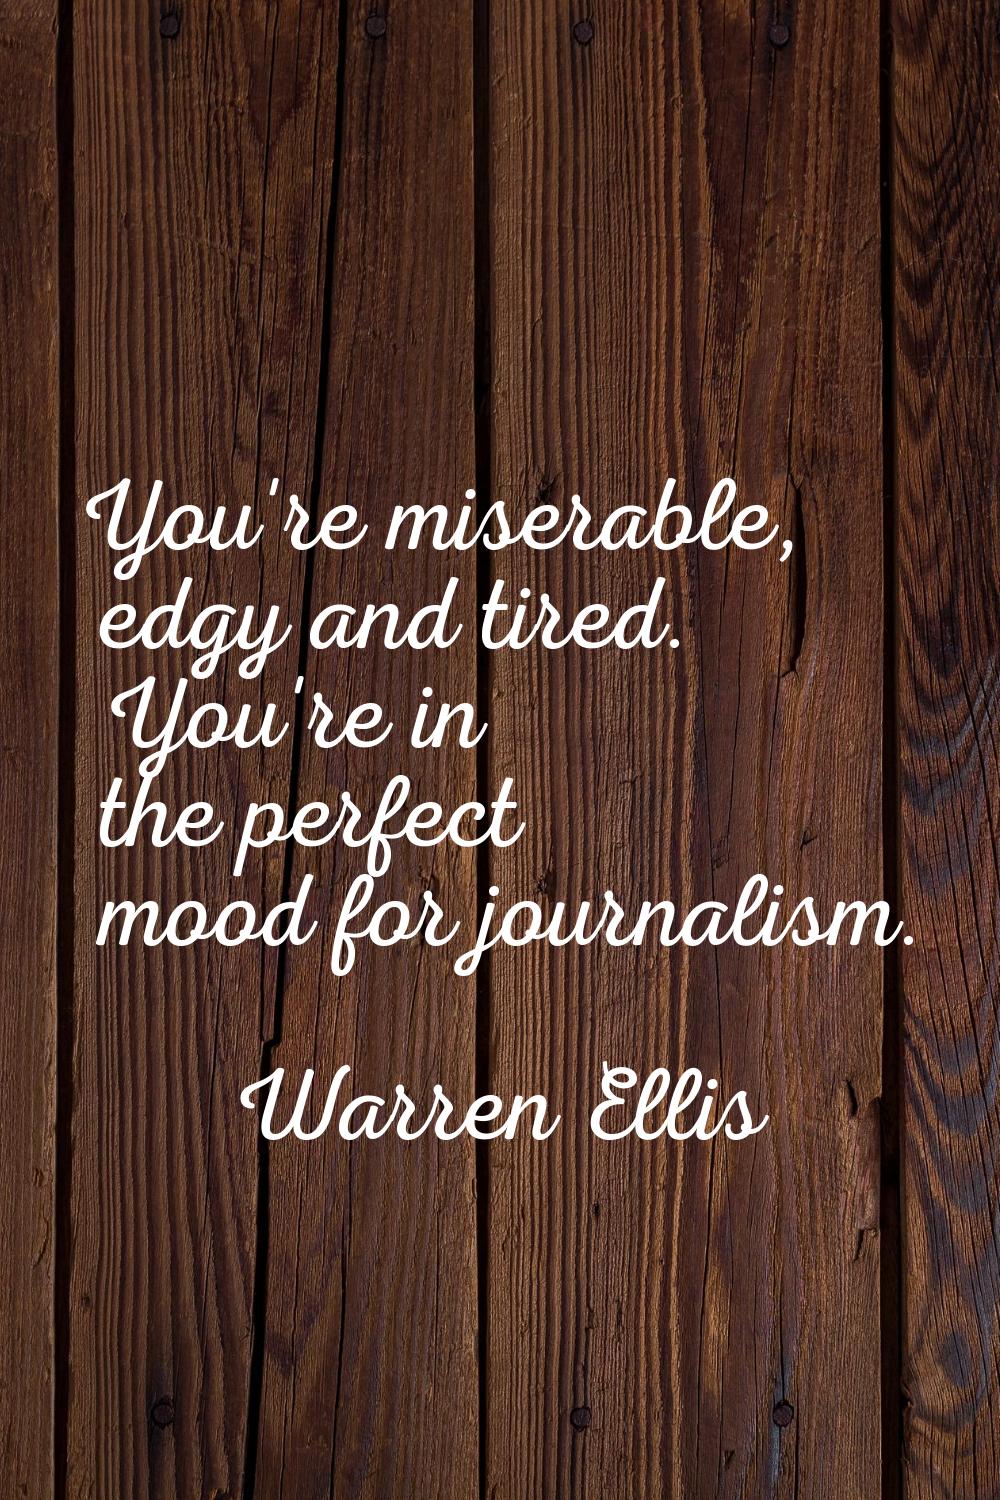 You're miserable, edgy and tired. You're in the perfect mood for journalism.